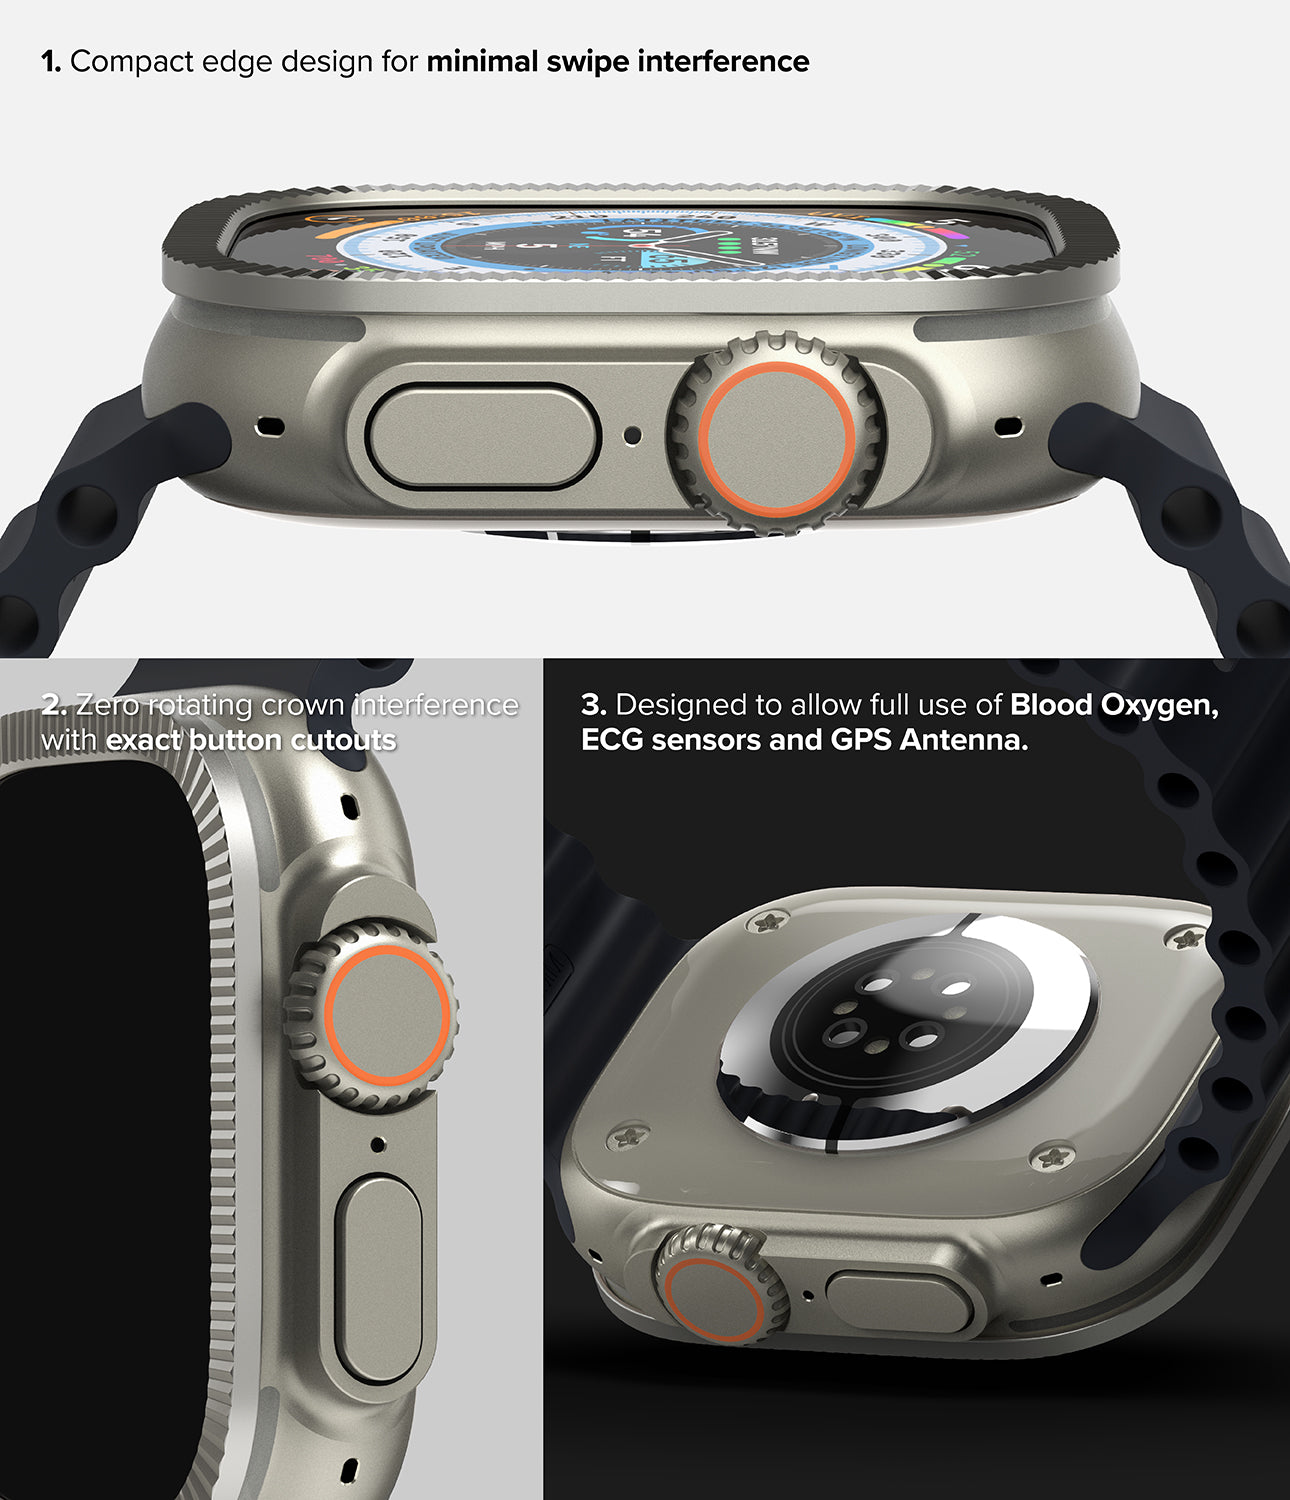 Apple Watch Ultra 2 / 1 | Glass + Bezel Styling 49-44 (ST) - Compact edge design for minimal swipe interference. Zero rotating crown interference with exact button cutouts. Designed to allow full use to Blood Oxygen, ECG sensors and GPS Antenna.